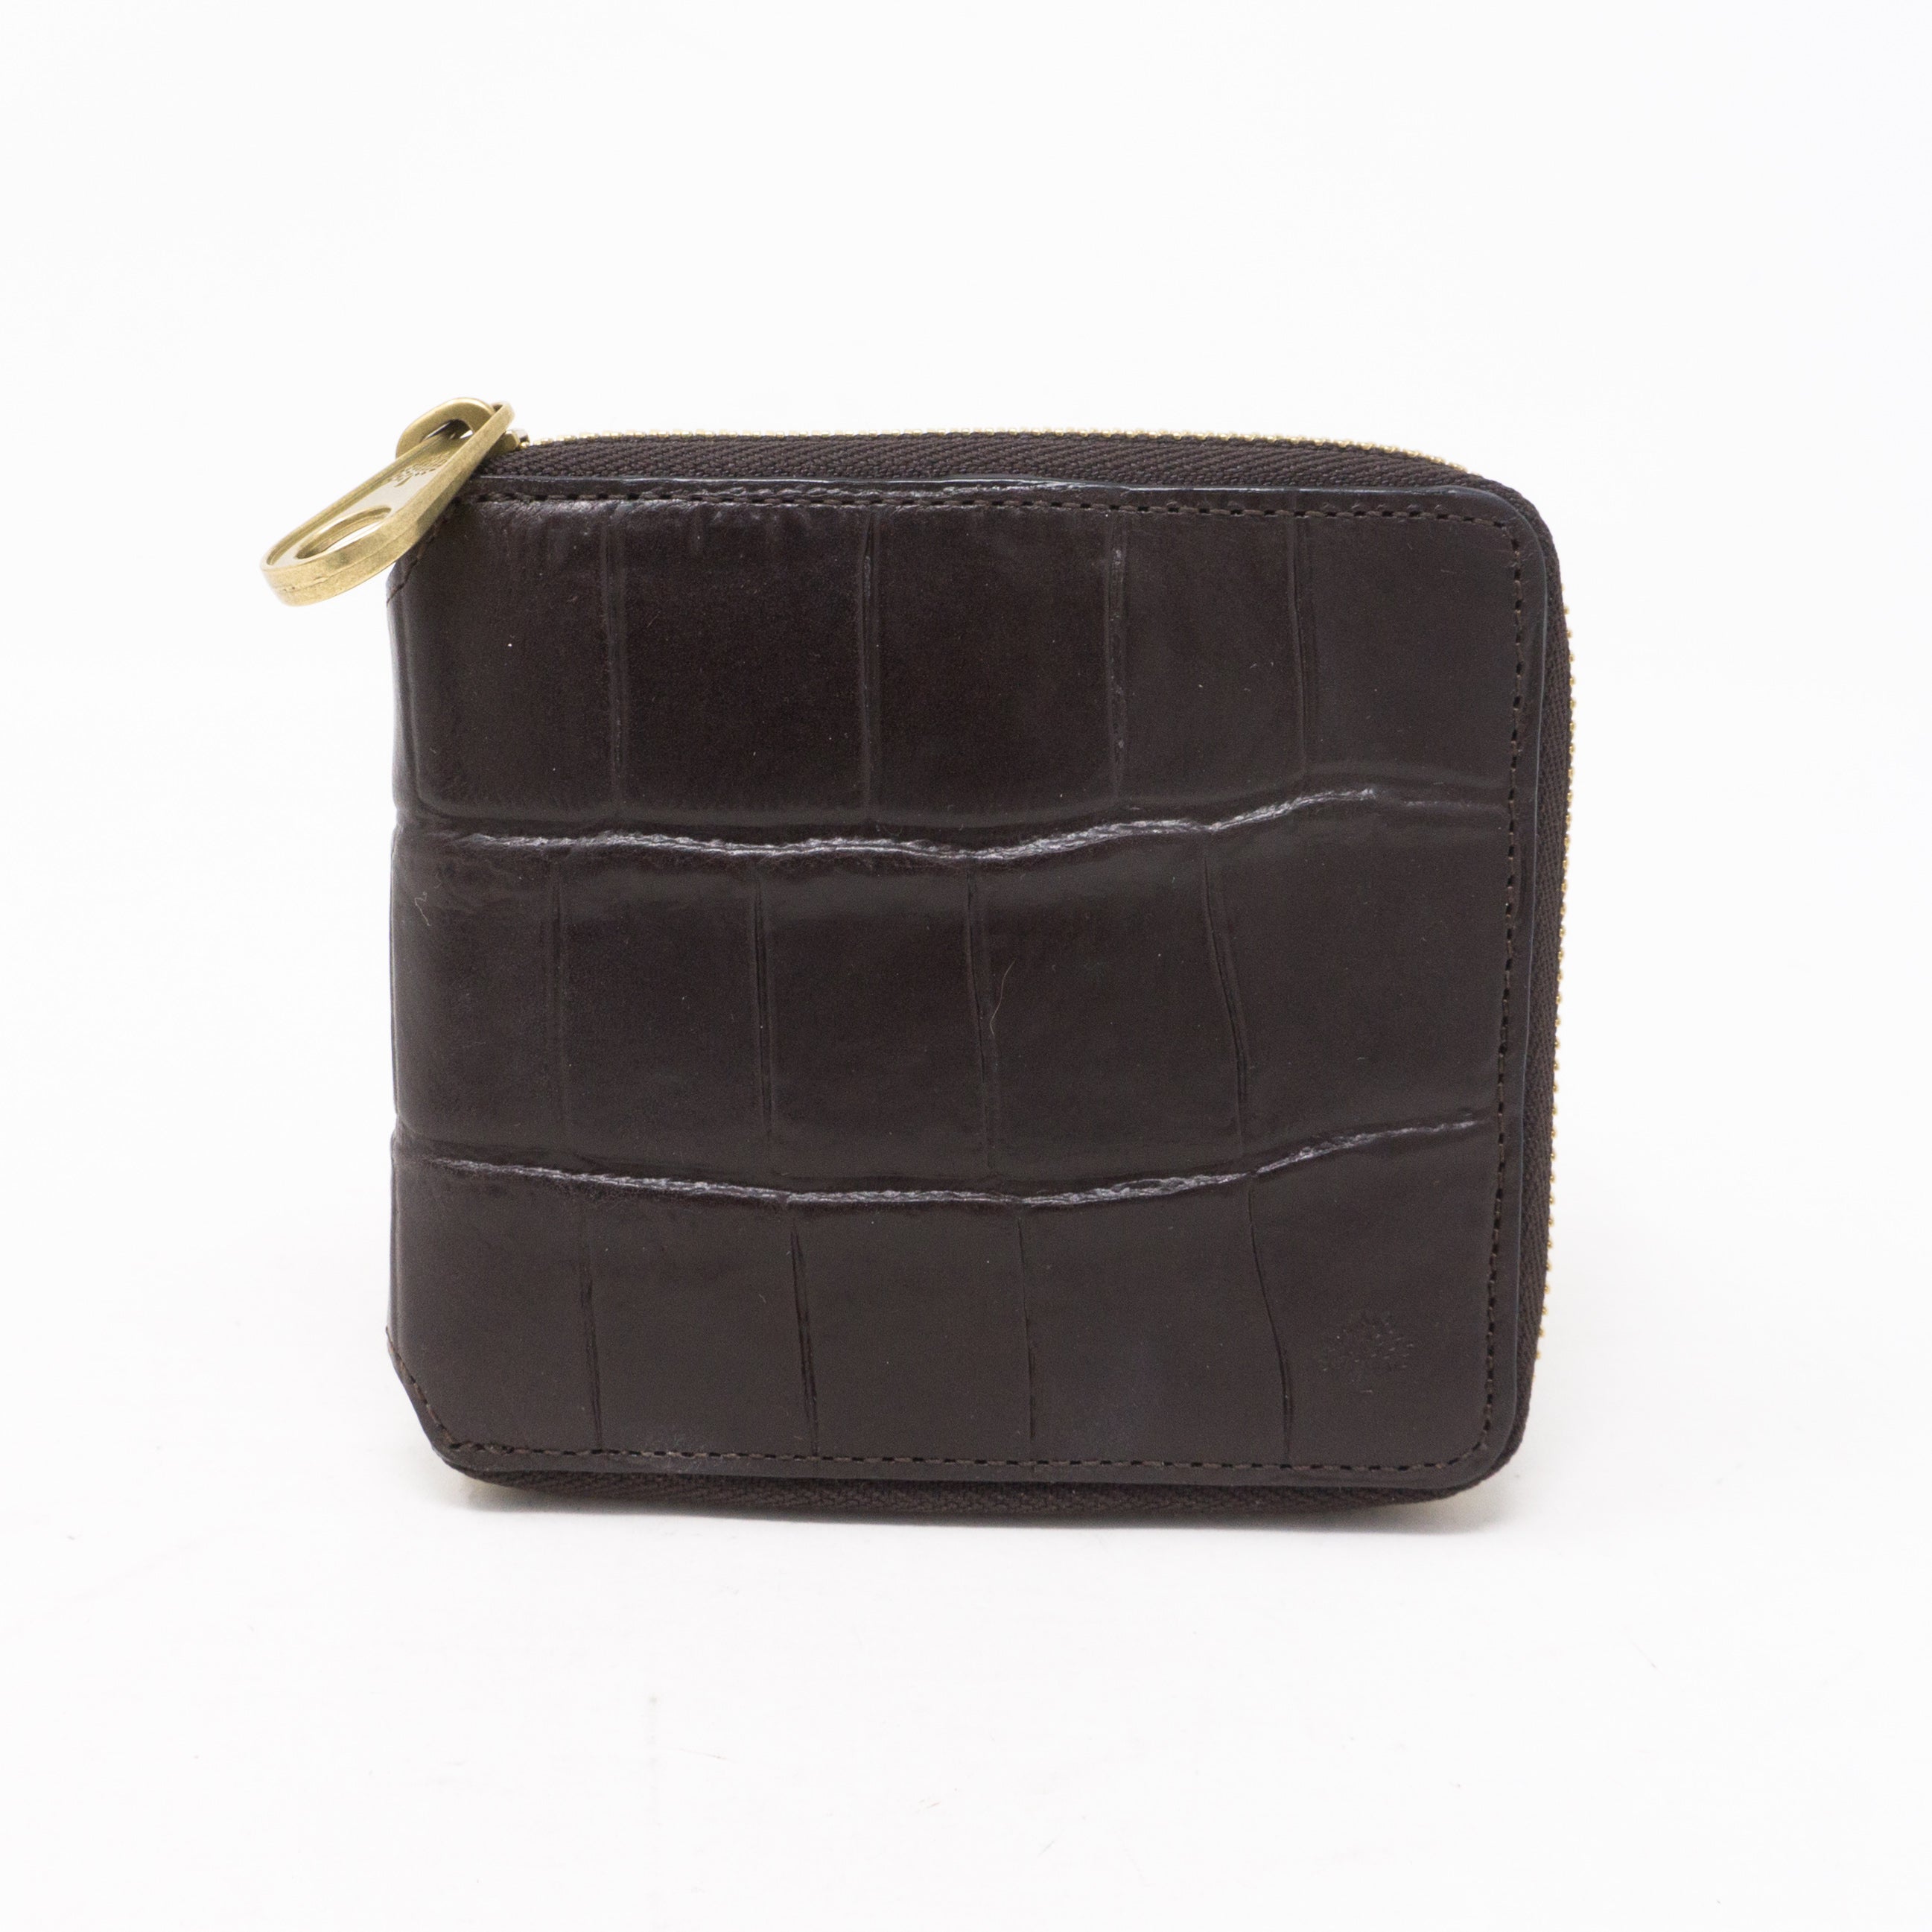 Mulberry Mini Lily Cookie | Nubuck leather, Mulberry, Zip around wallet